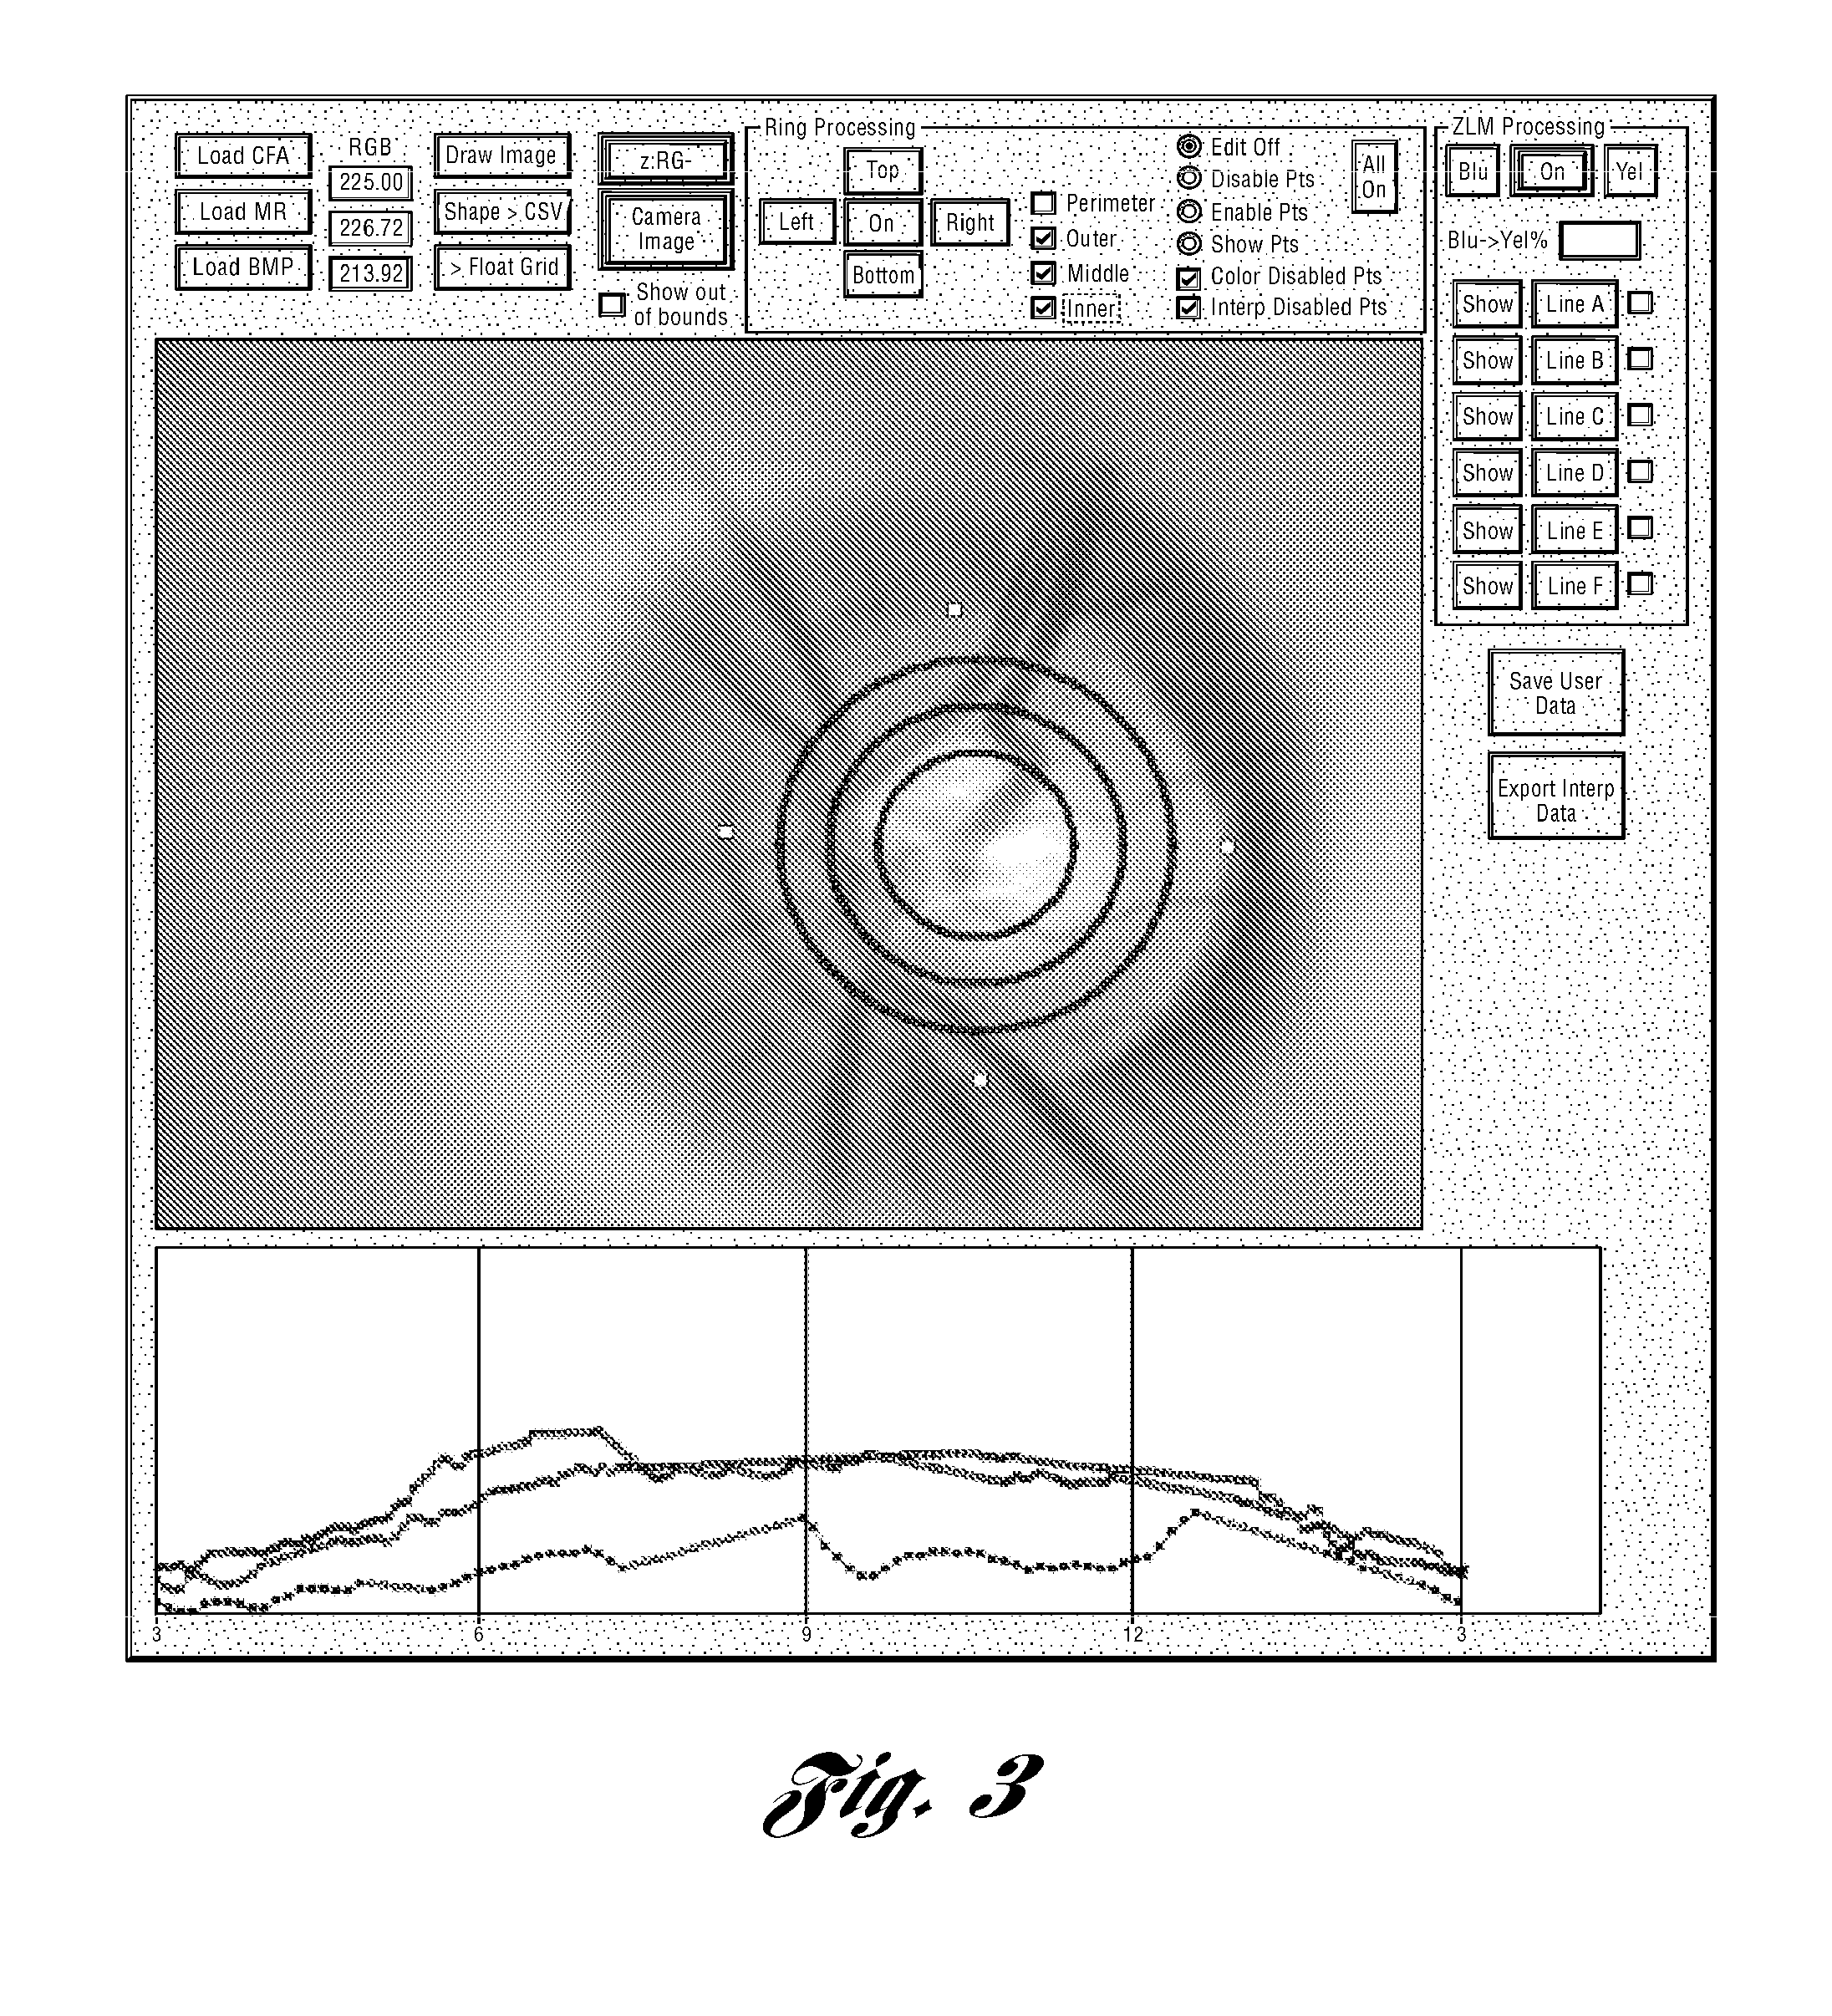 System and Method for Determining Volume-Related Parameters of Ocular and Other Biological Tissues